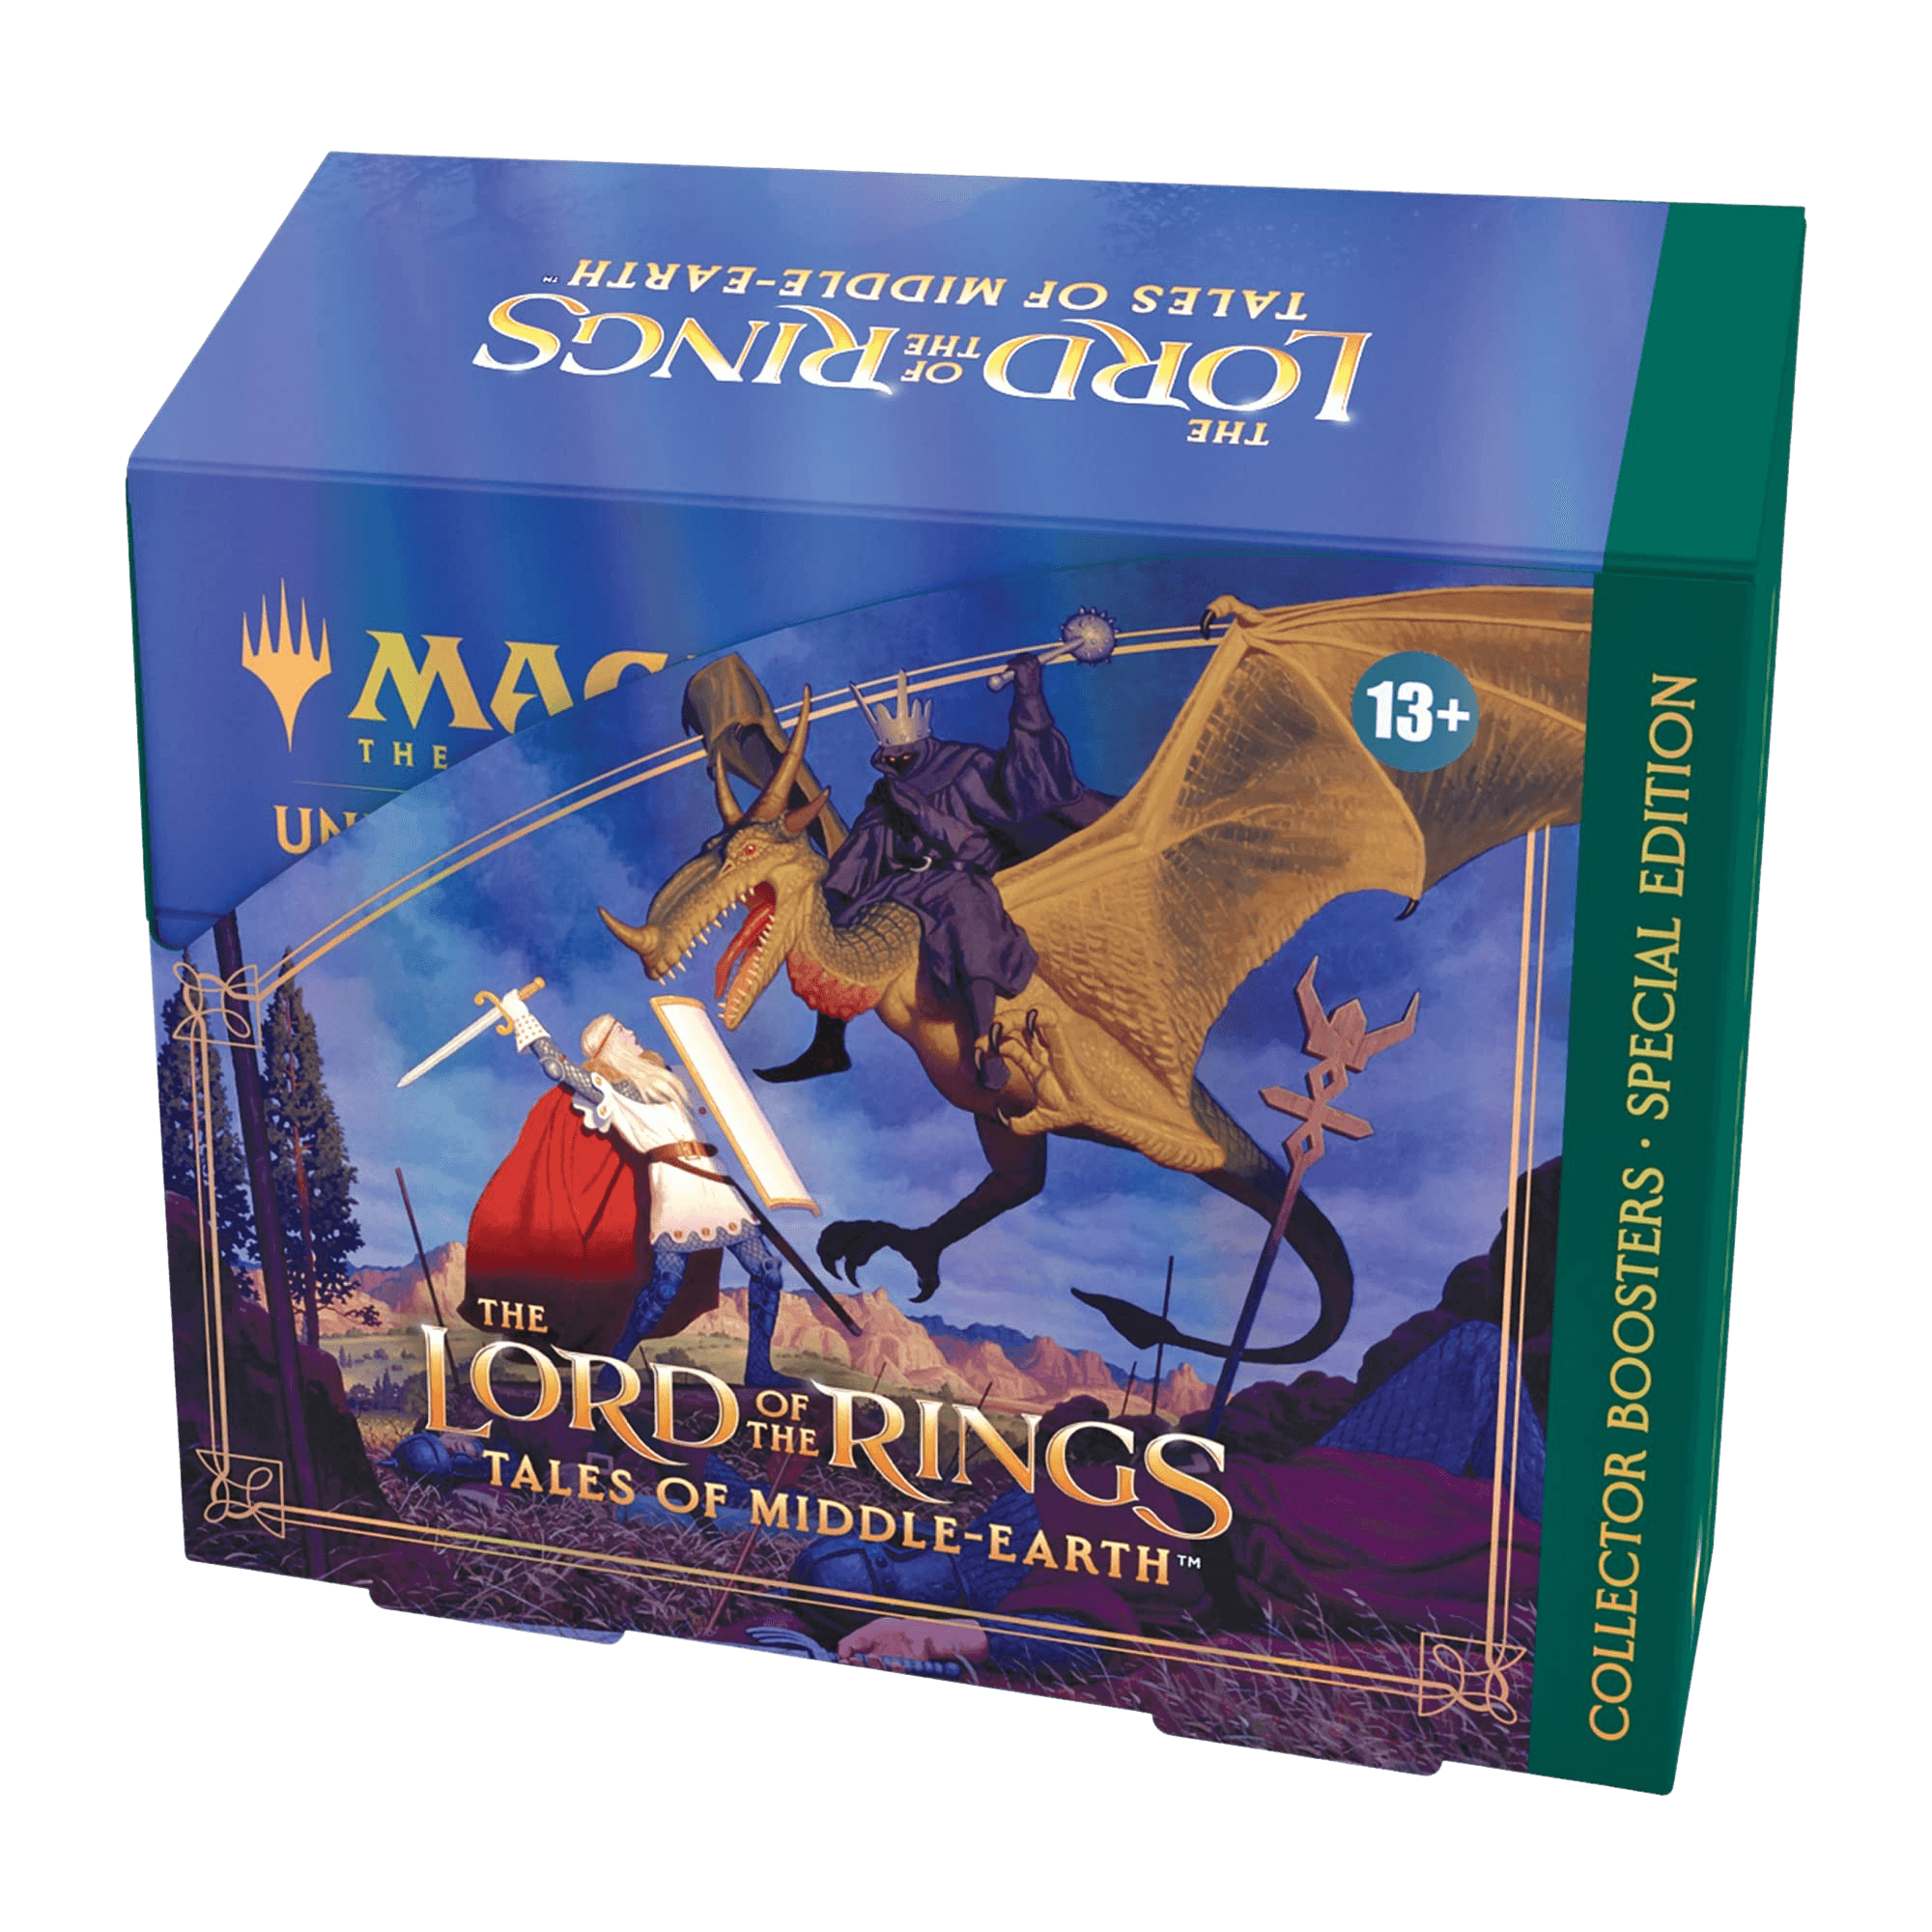 Magic: The Gathering - Lord of the Rings: Tales of Middle-Earth - Collector Booster Box (12 Packs) - Special Holiday Edition - The Card Vault